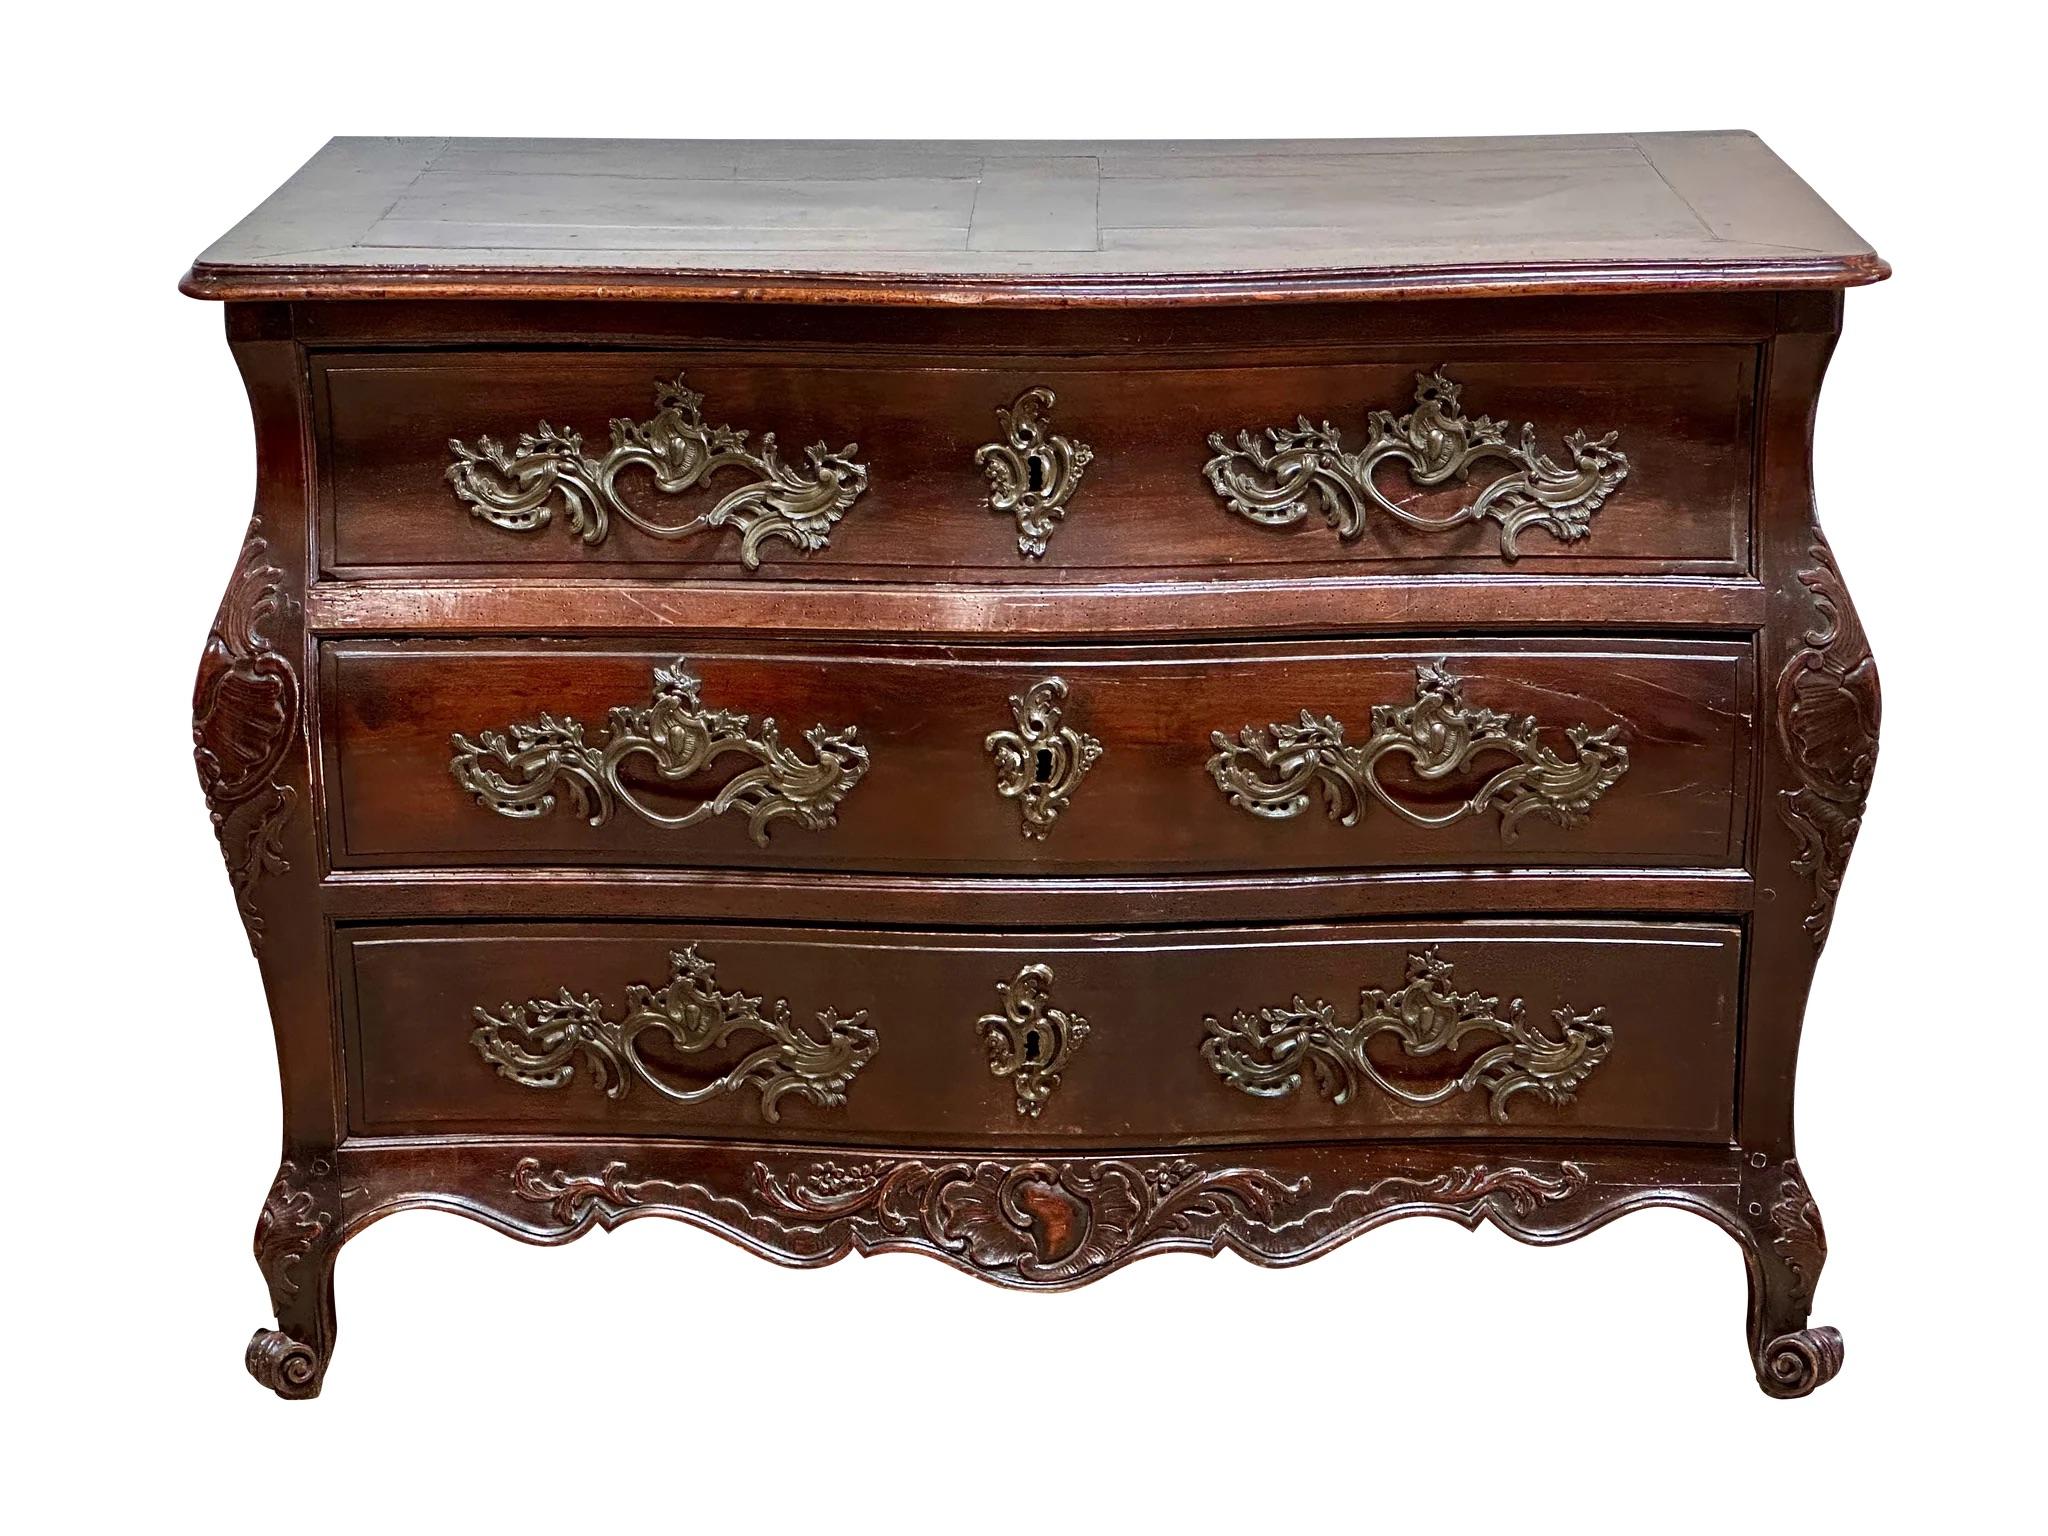 18th Century Louise XV French richly hued Walnut Bombe Commode Serpentine top and front, bombe form case, three drawers with applied bronze and escutcheons,. Carved and shaped foliate scroll skirt, scroll feet. 
